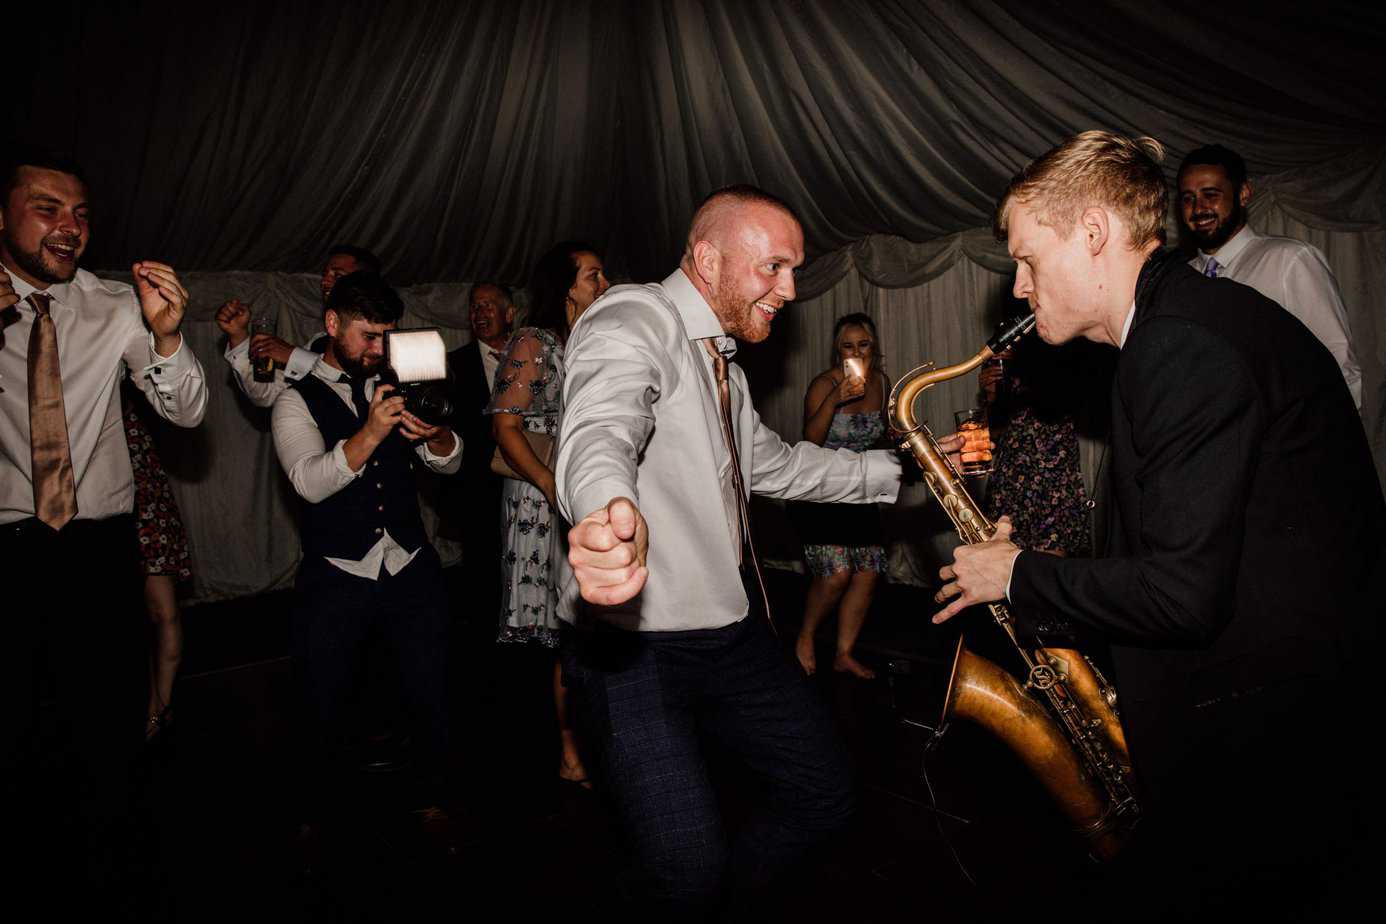 The best dj and saxophone wedding duo getting people dancing at wedding